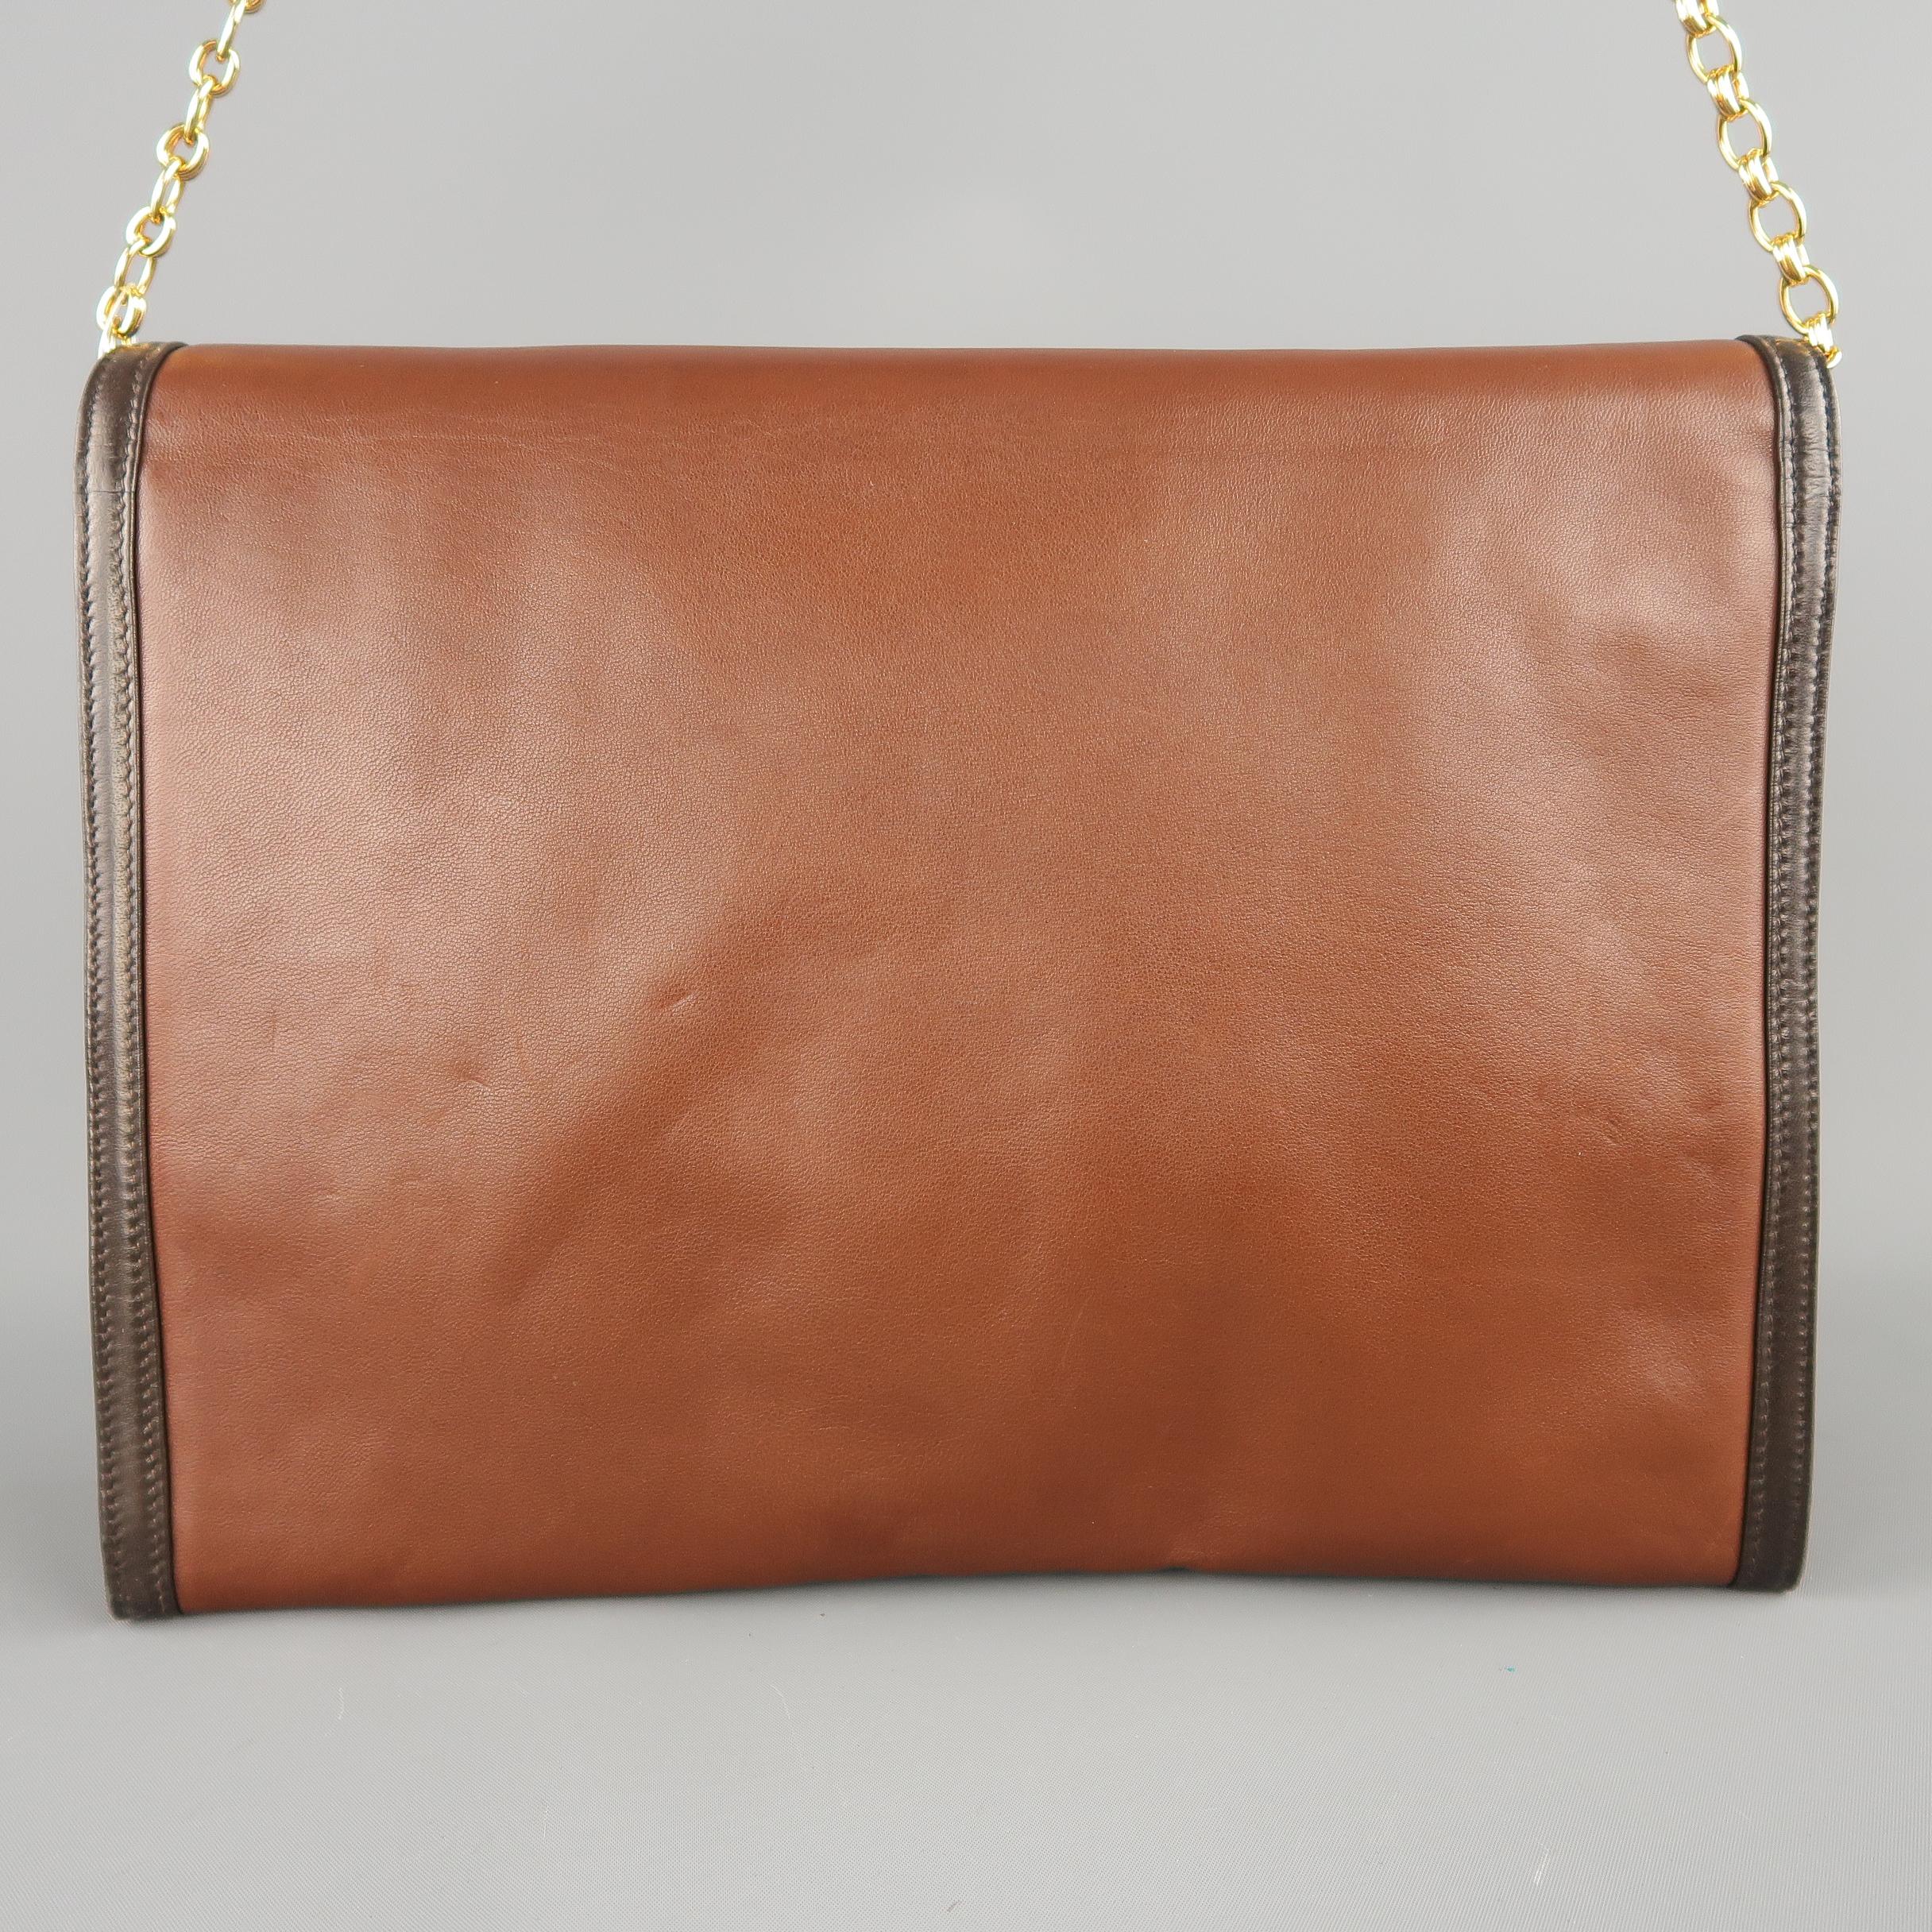 Chanel Vintage Brown Two Tone Leather Gold Chain CC Shoulder Bag, 1980s  1